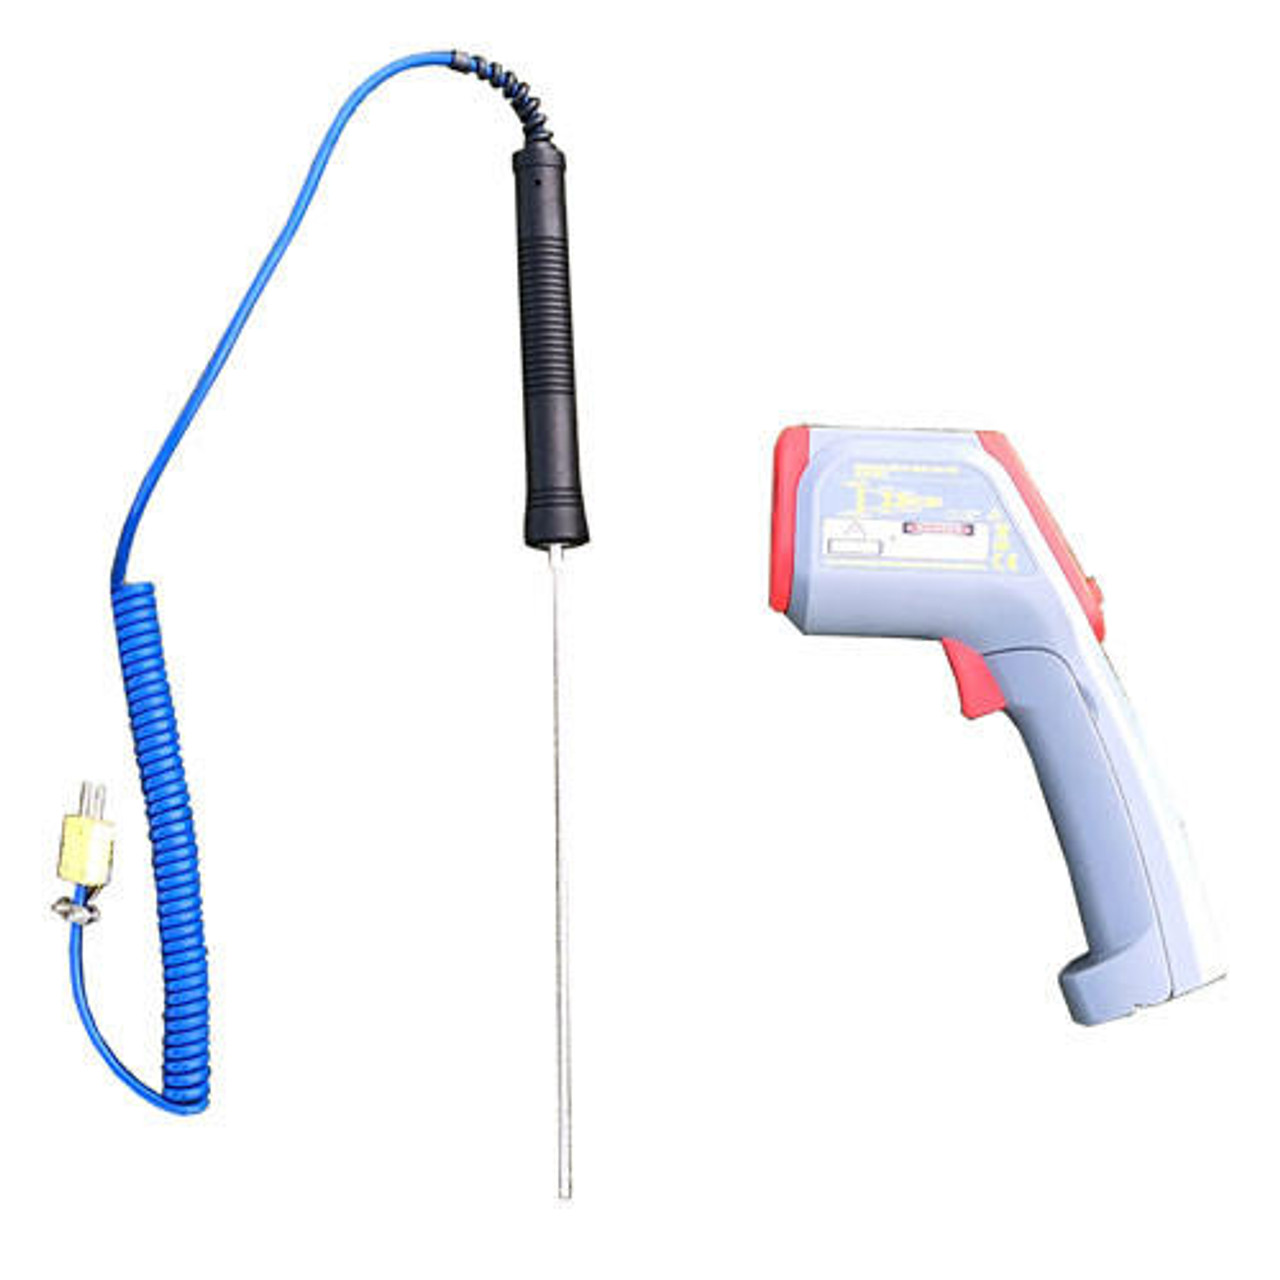 IRTN400L2 Professional Grade DUAL LASER Infrared Thermometer Infrared –  Tech Instrumentation